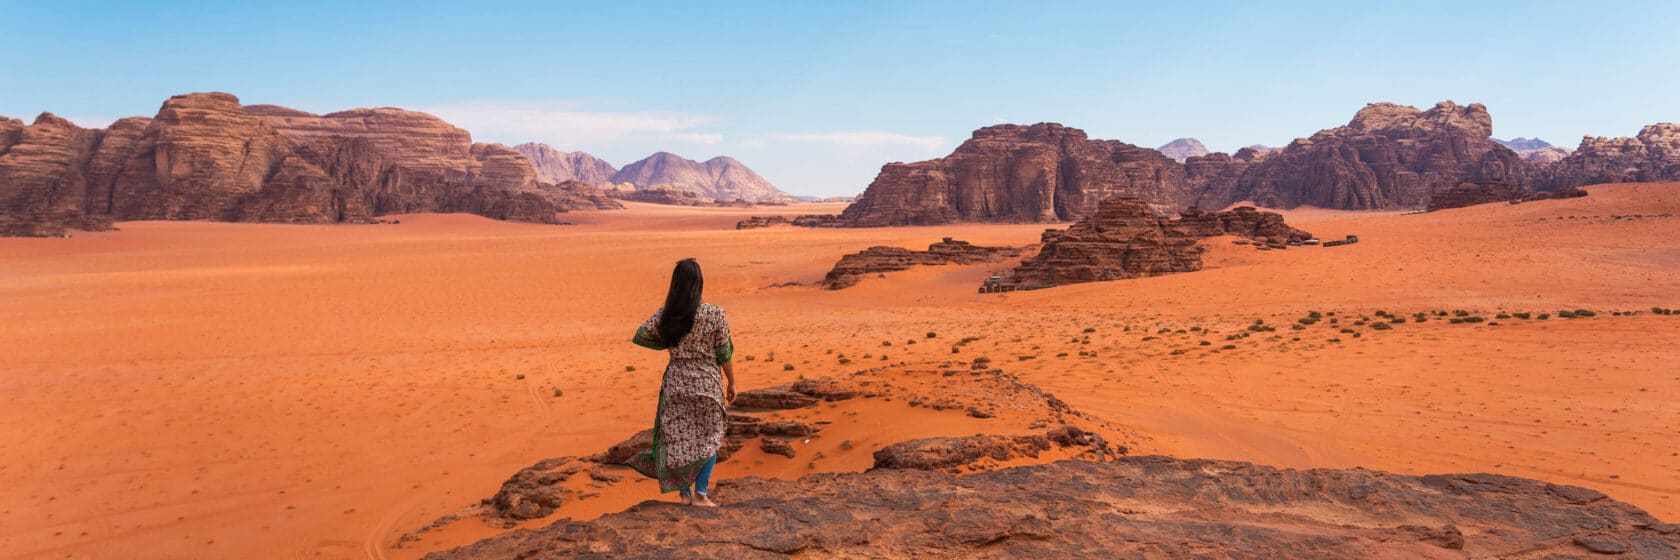 A tourist dressed in a local Arab dress standing on top of mountain and enjoying landscape of Wadi Rum desert in Jordan.